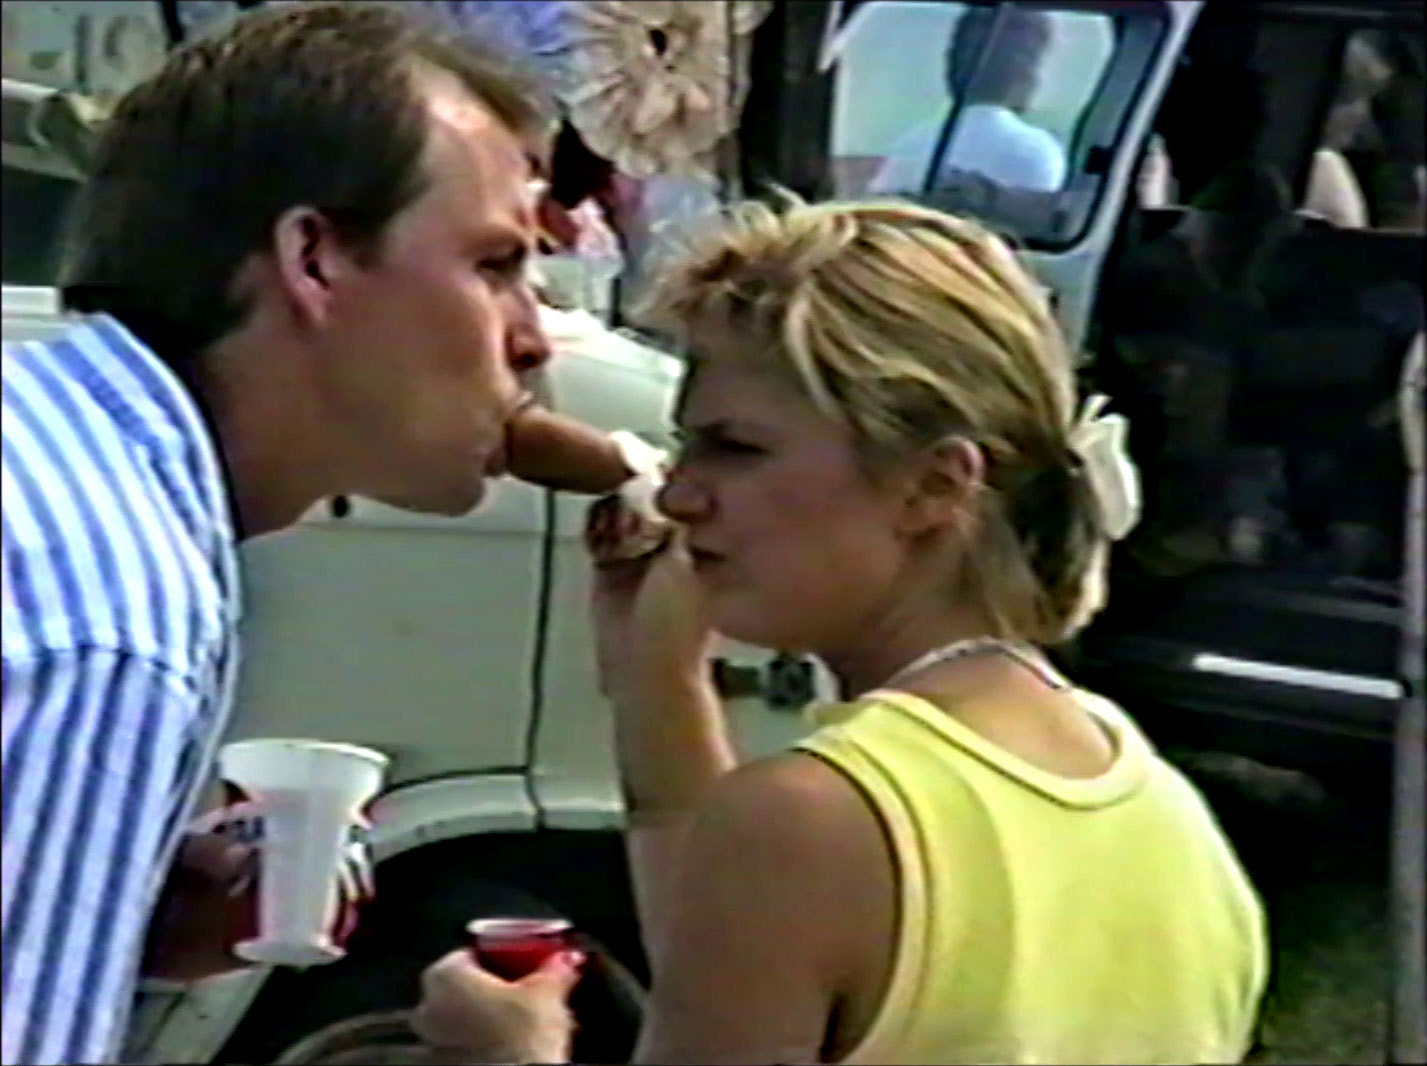 A woman feeding a man hot dog at Collinsville Trade Day.